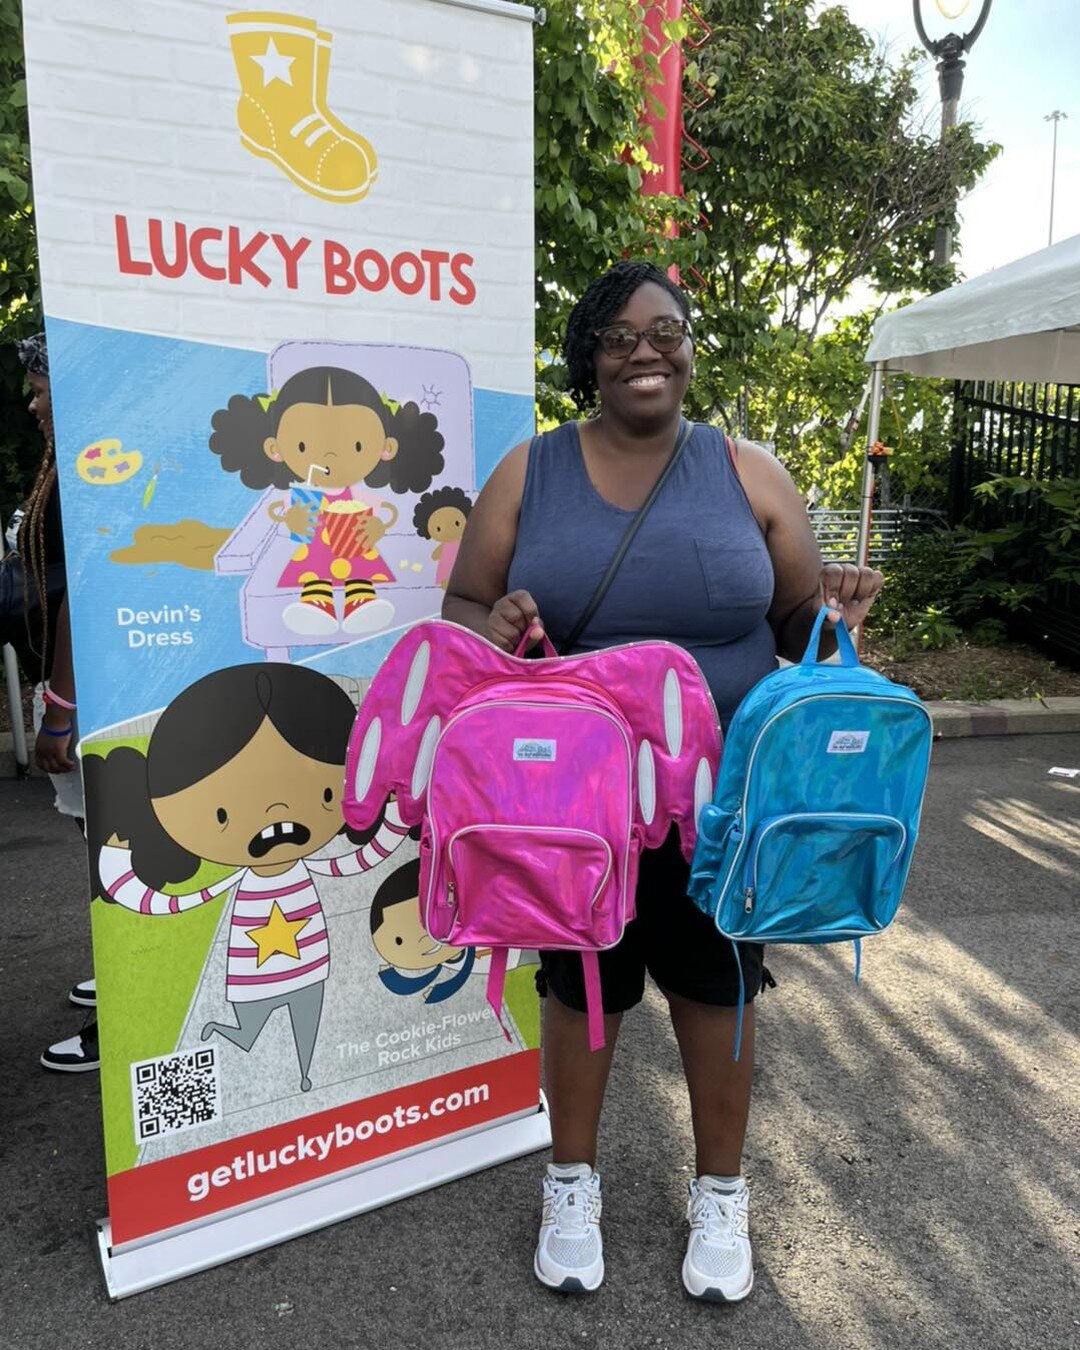 We had a blast today at @blackartsfestmke. We thank everyone for your support including today&rsquo;s giveaway winner Trinette Taylor! ❤️
#GetLuckyBoots
#BAFMKE22